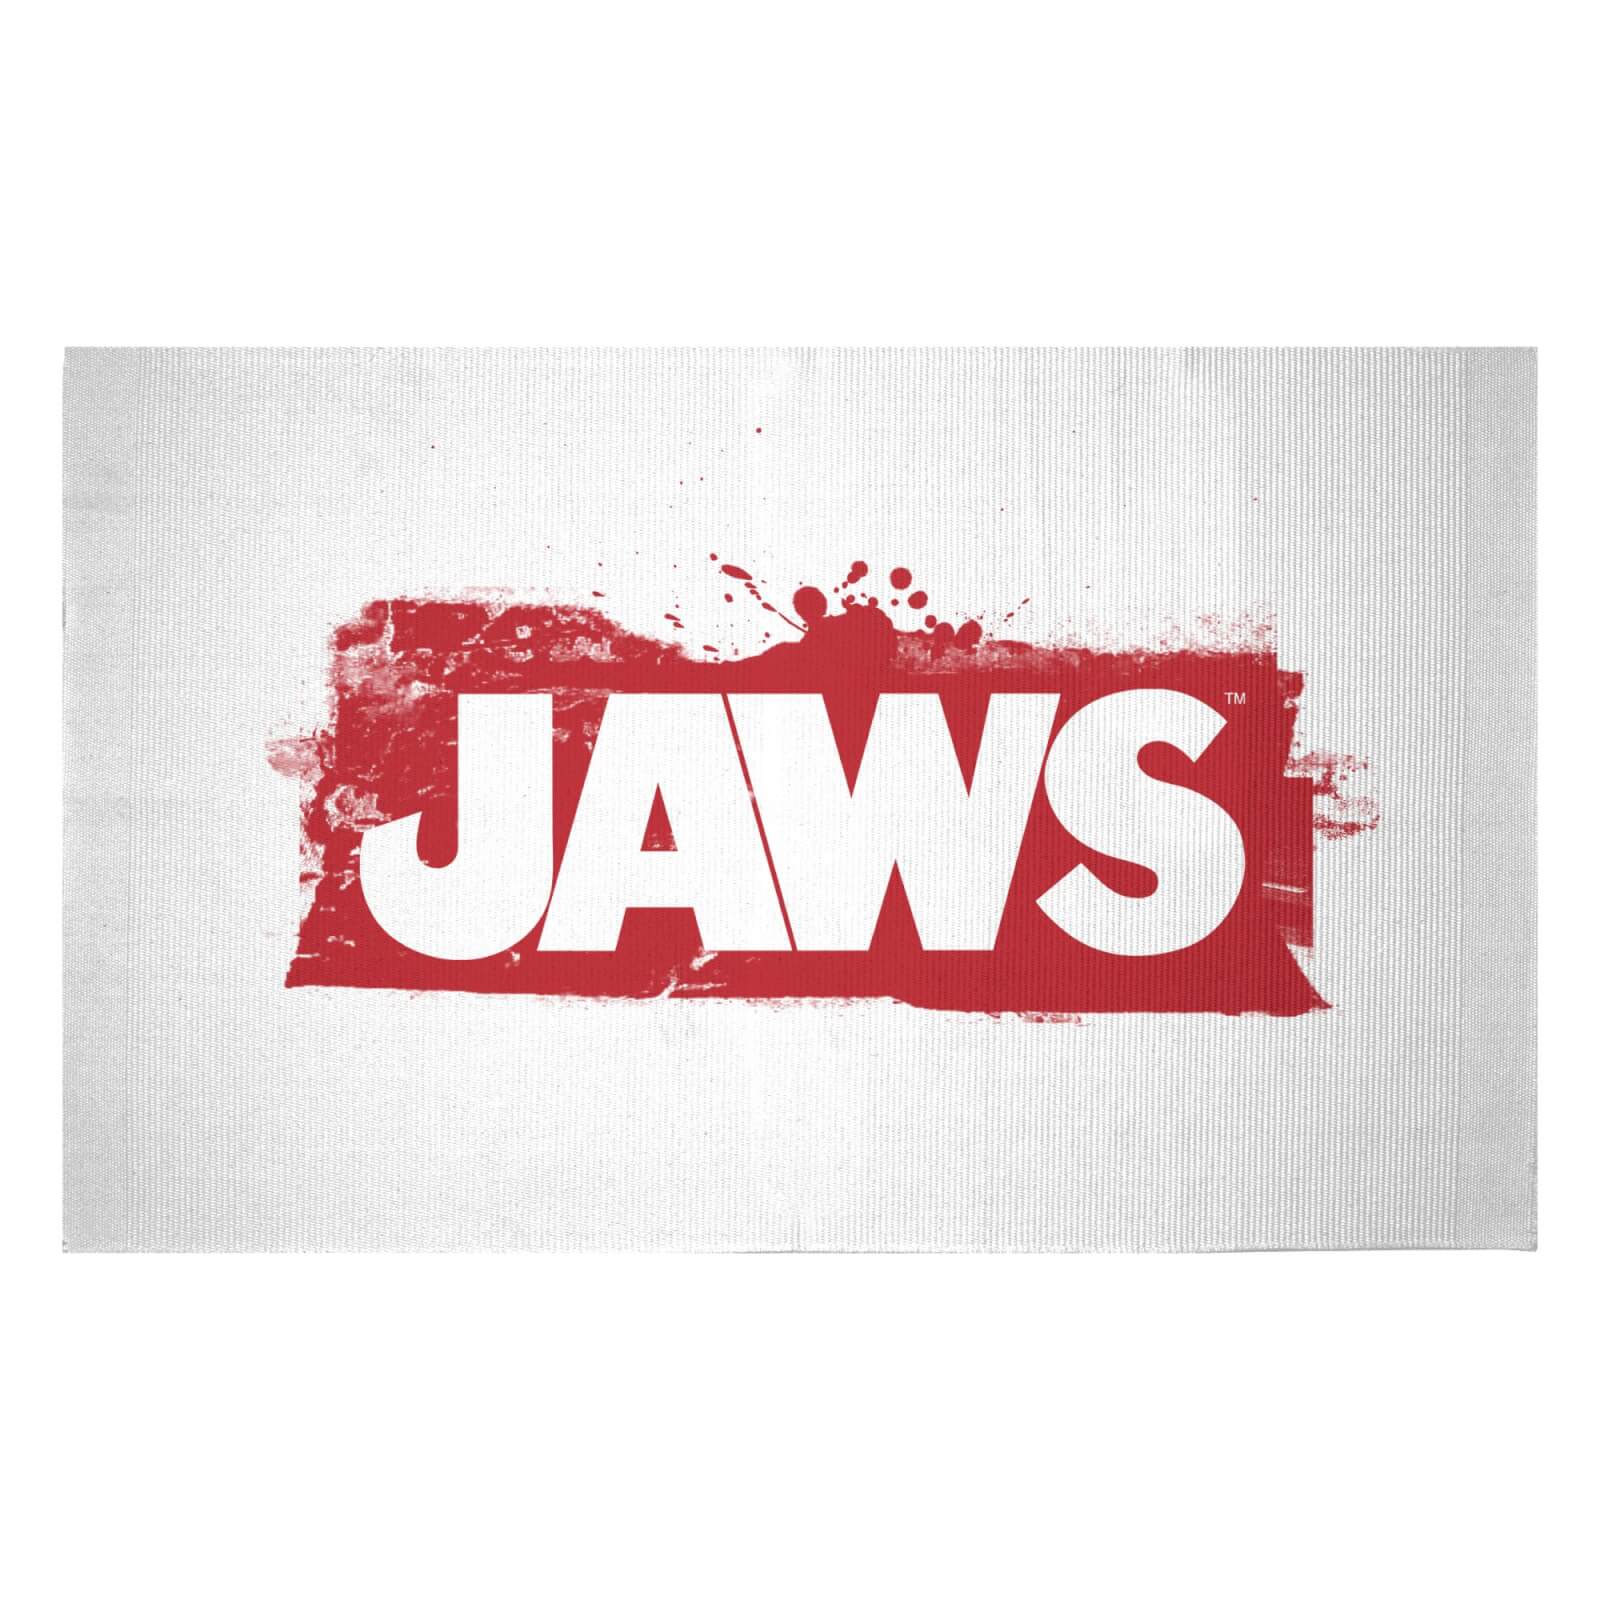 Jaws Logo Woven Rug - Small